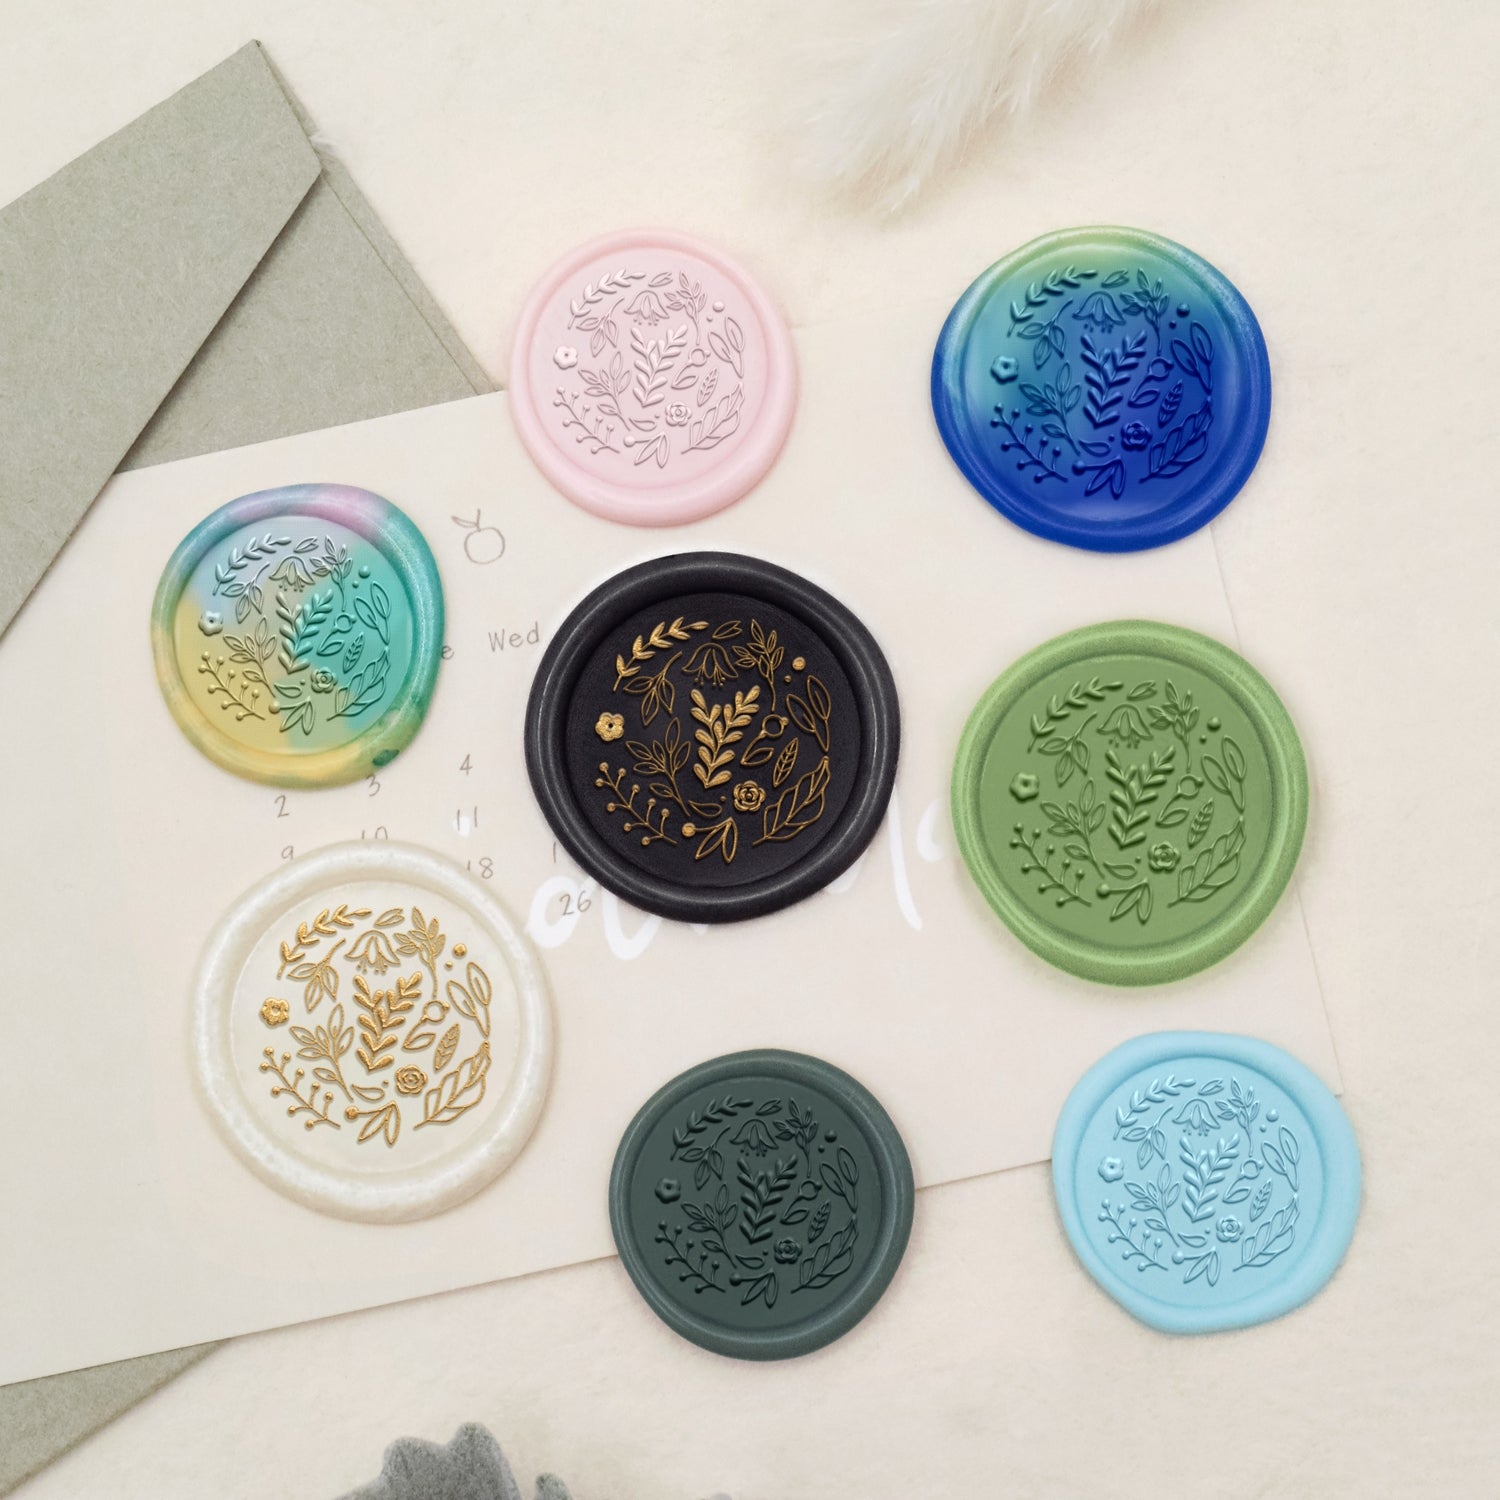 Floral Tile Pattern Wax Seal Stamp - Style 9 3